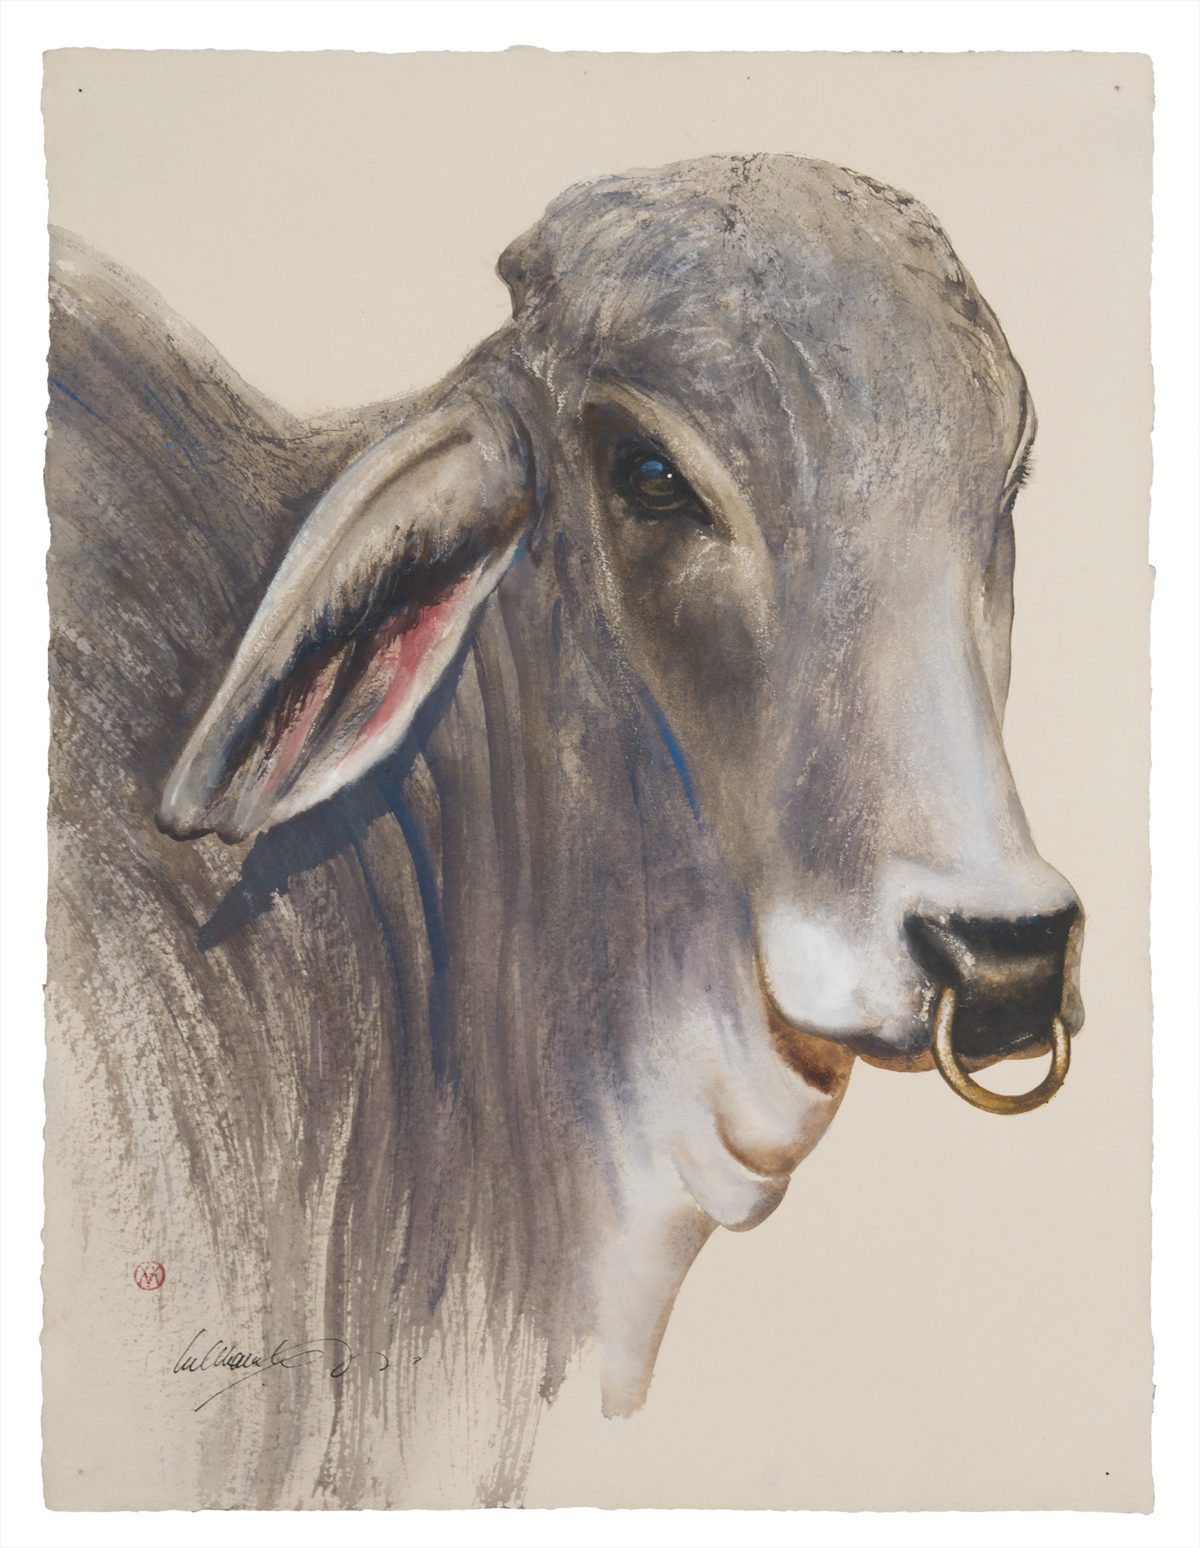 A painting of a bull